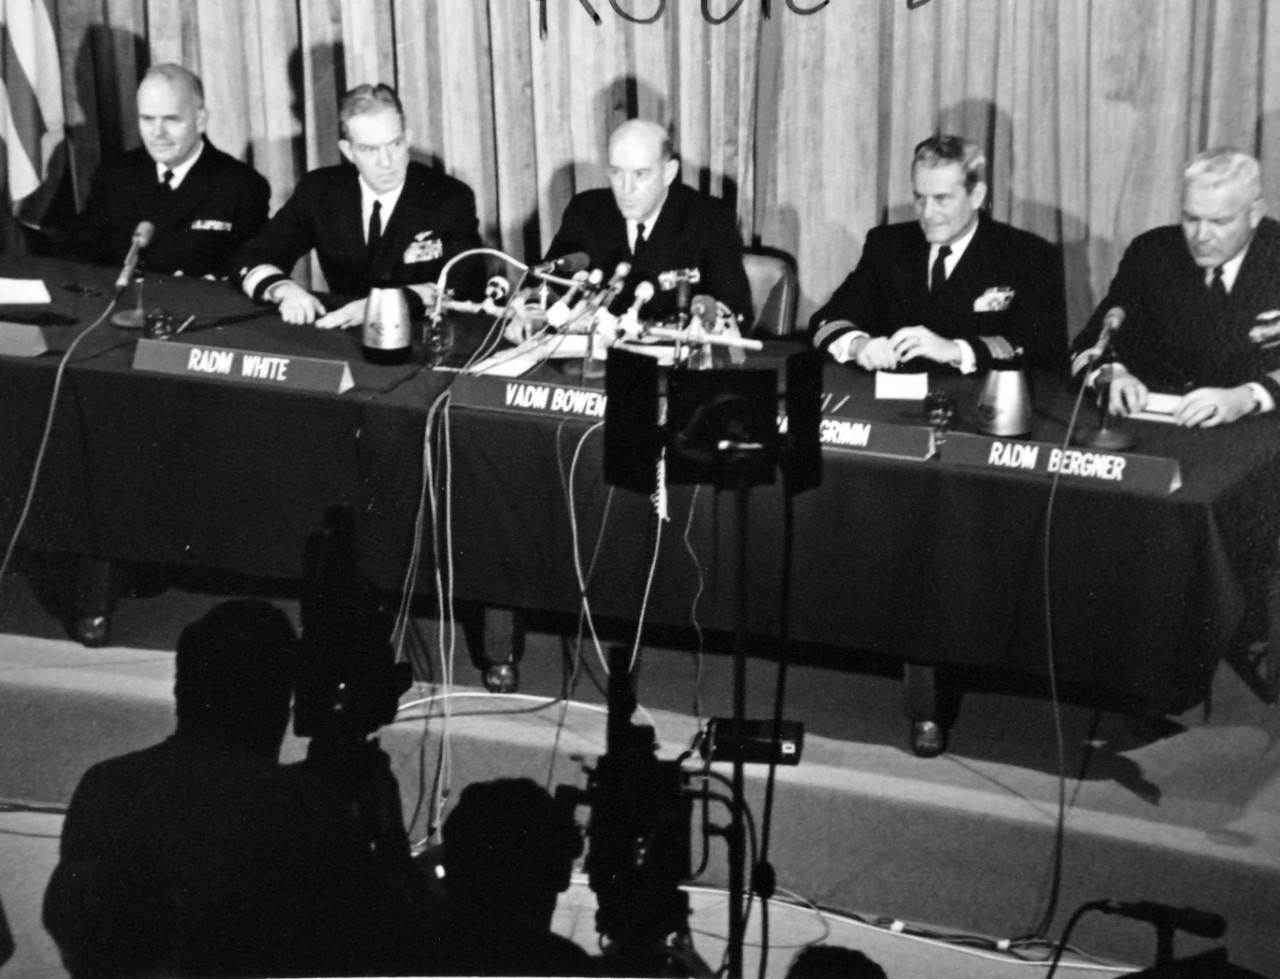 428-GX-USN-1140136:   U.S. Naval Amphibious Base, Coronado, San Diego, California, March 13, 1969.    The Court of Inquiry on the capture of the environmental research ship, USS Pueblo (AGER-2) by North Kora.  Shown, from left, Rear Admiral Richard R. Pratt, Commander, Amphibious Training Command, U.S. Pacific Fleet; Rear Admiral Marshall W. White, Commander, Pacific Missile Range; Vice Admiral Harold G. Bowen, Jr., Commander, Anti-Submarine Warfare Force, U.S. Pacific Fleet; and Rear Admiral Edward W. Grimm. Photographed by Wayne W. Massie Official U.S. Navy Photograph, now in the collections of the National Archives (2017/05/23).  Photographed from reference card.  